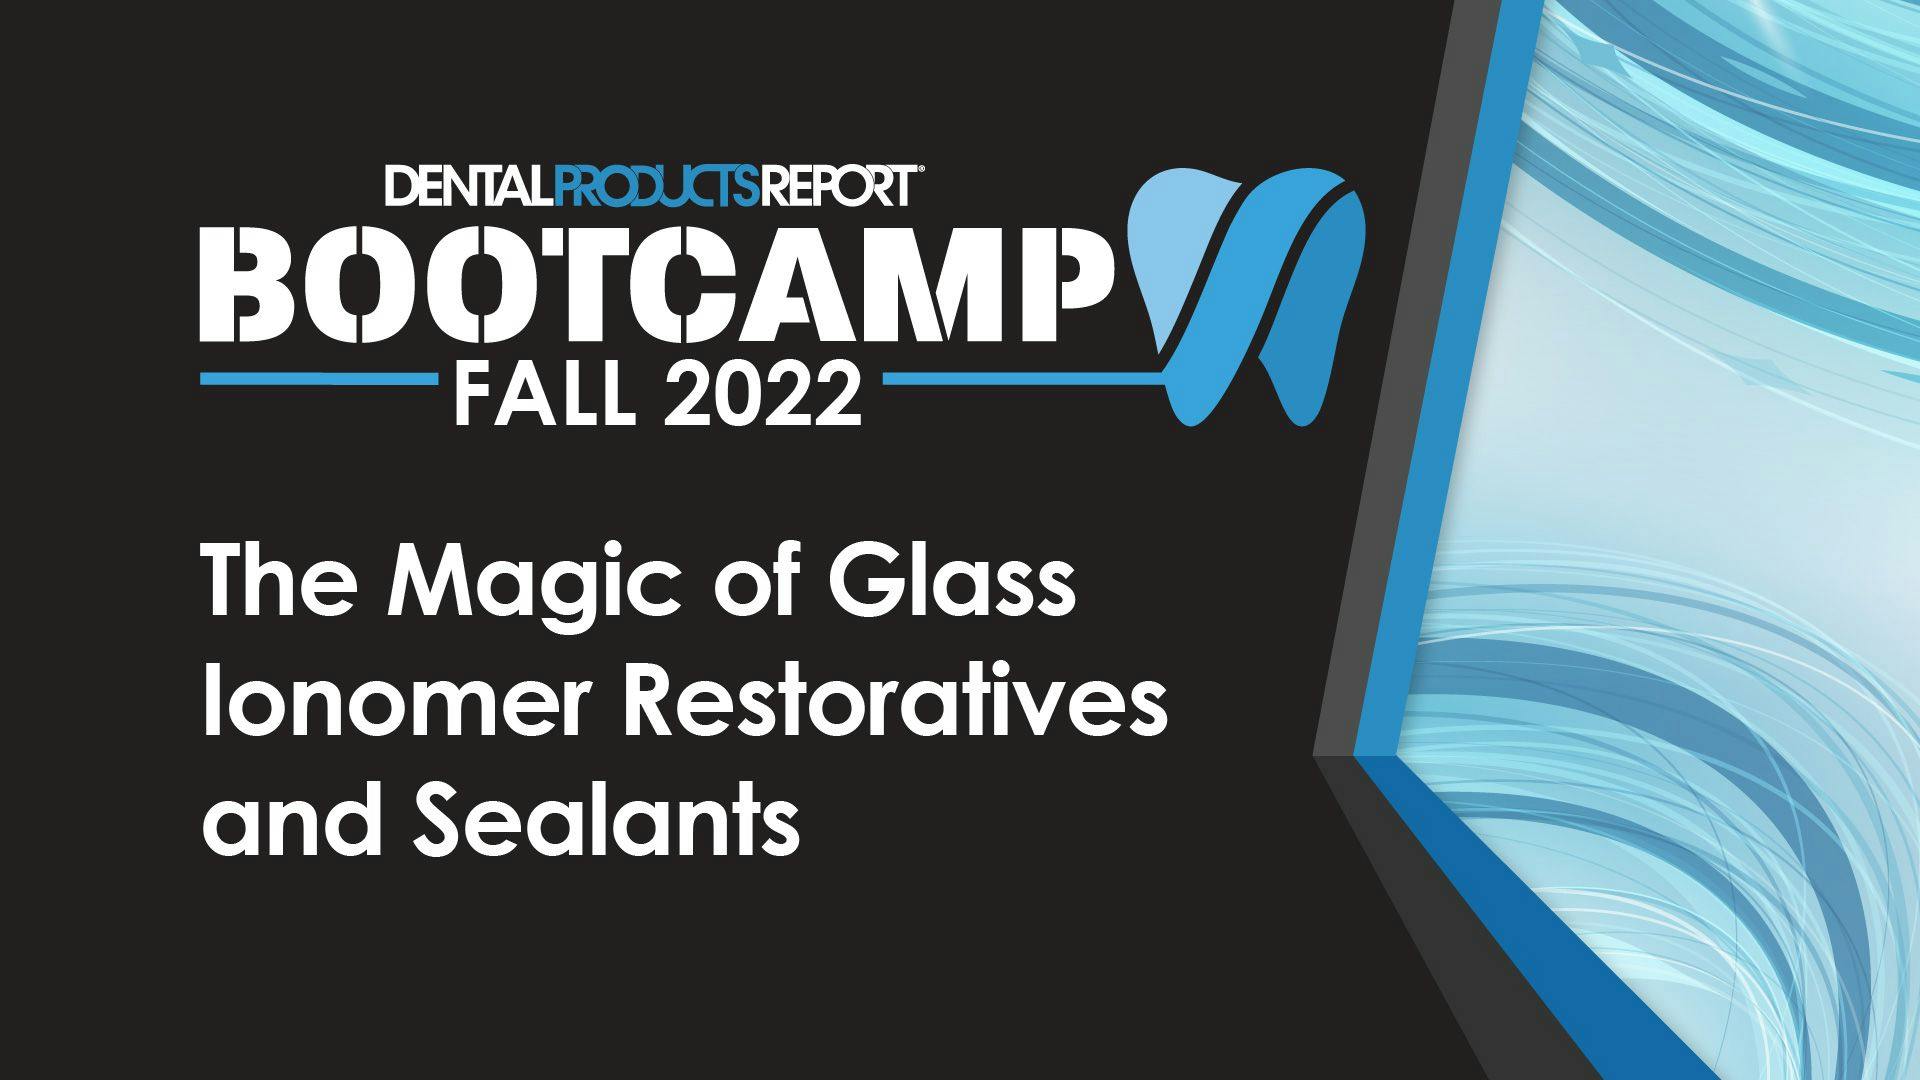 Dental Products Report Bootcamp Fall 2022 - The Magic of Glass Ionomer Restoratives and Sealants